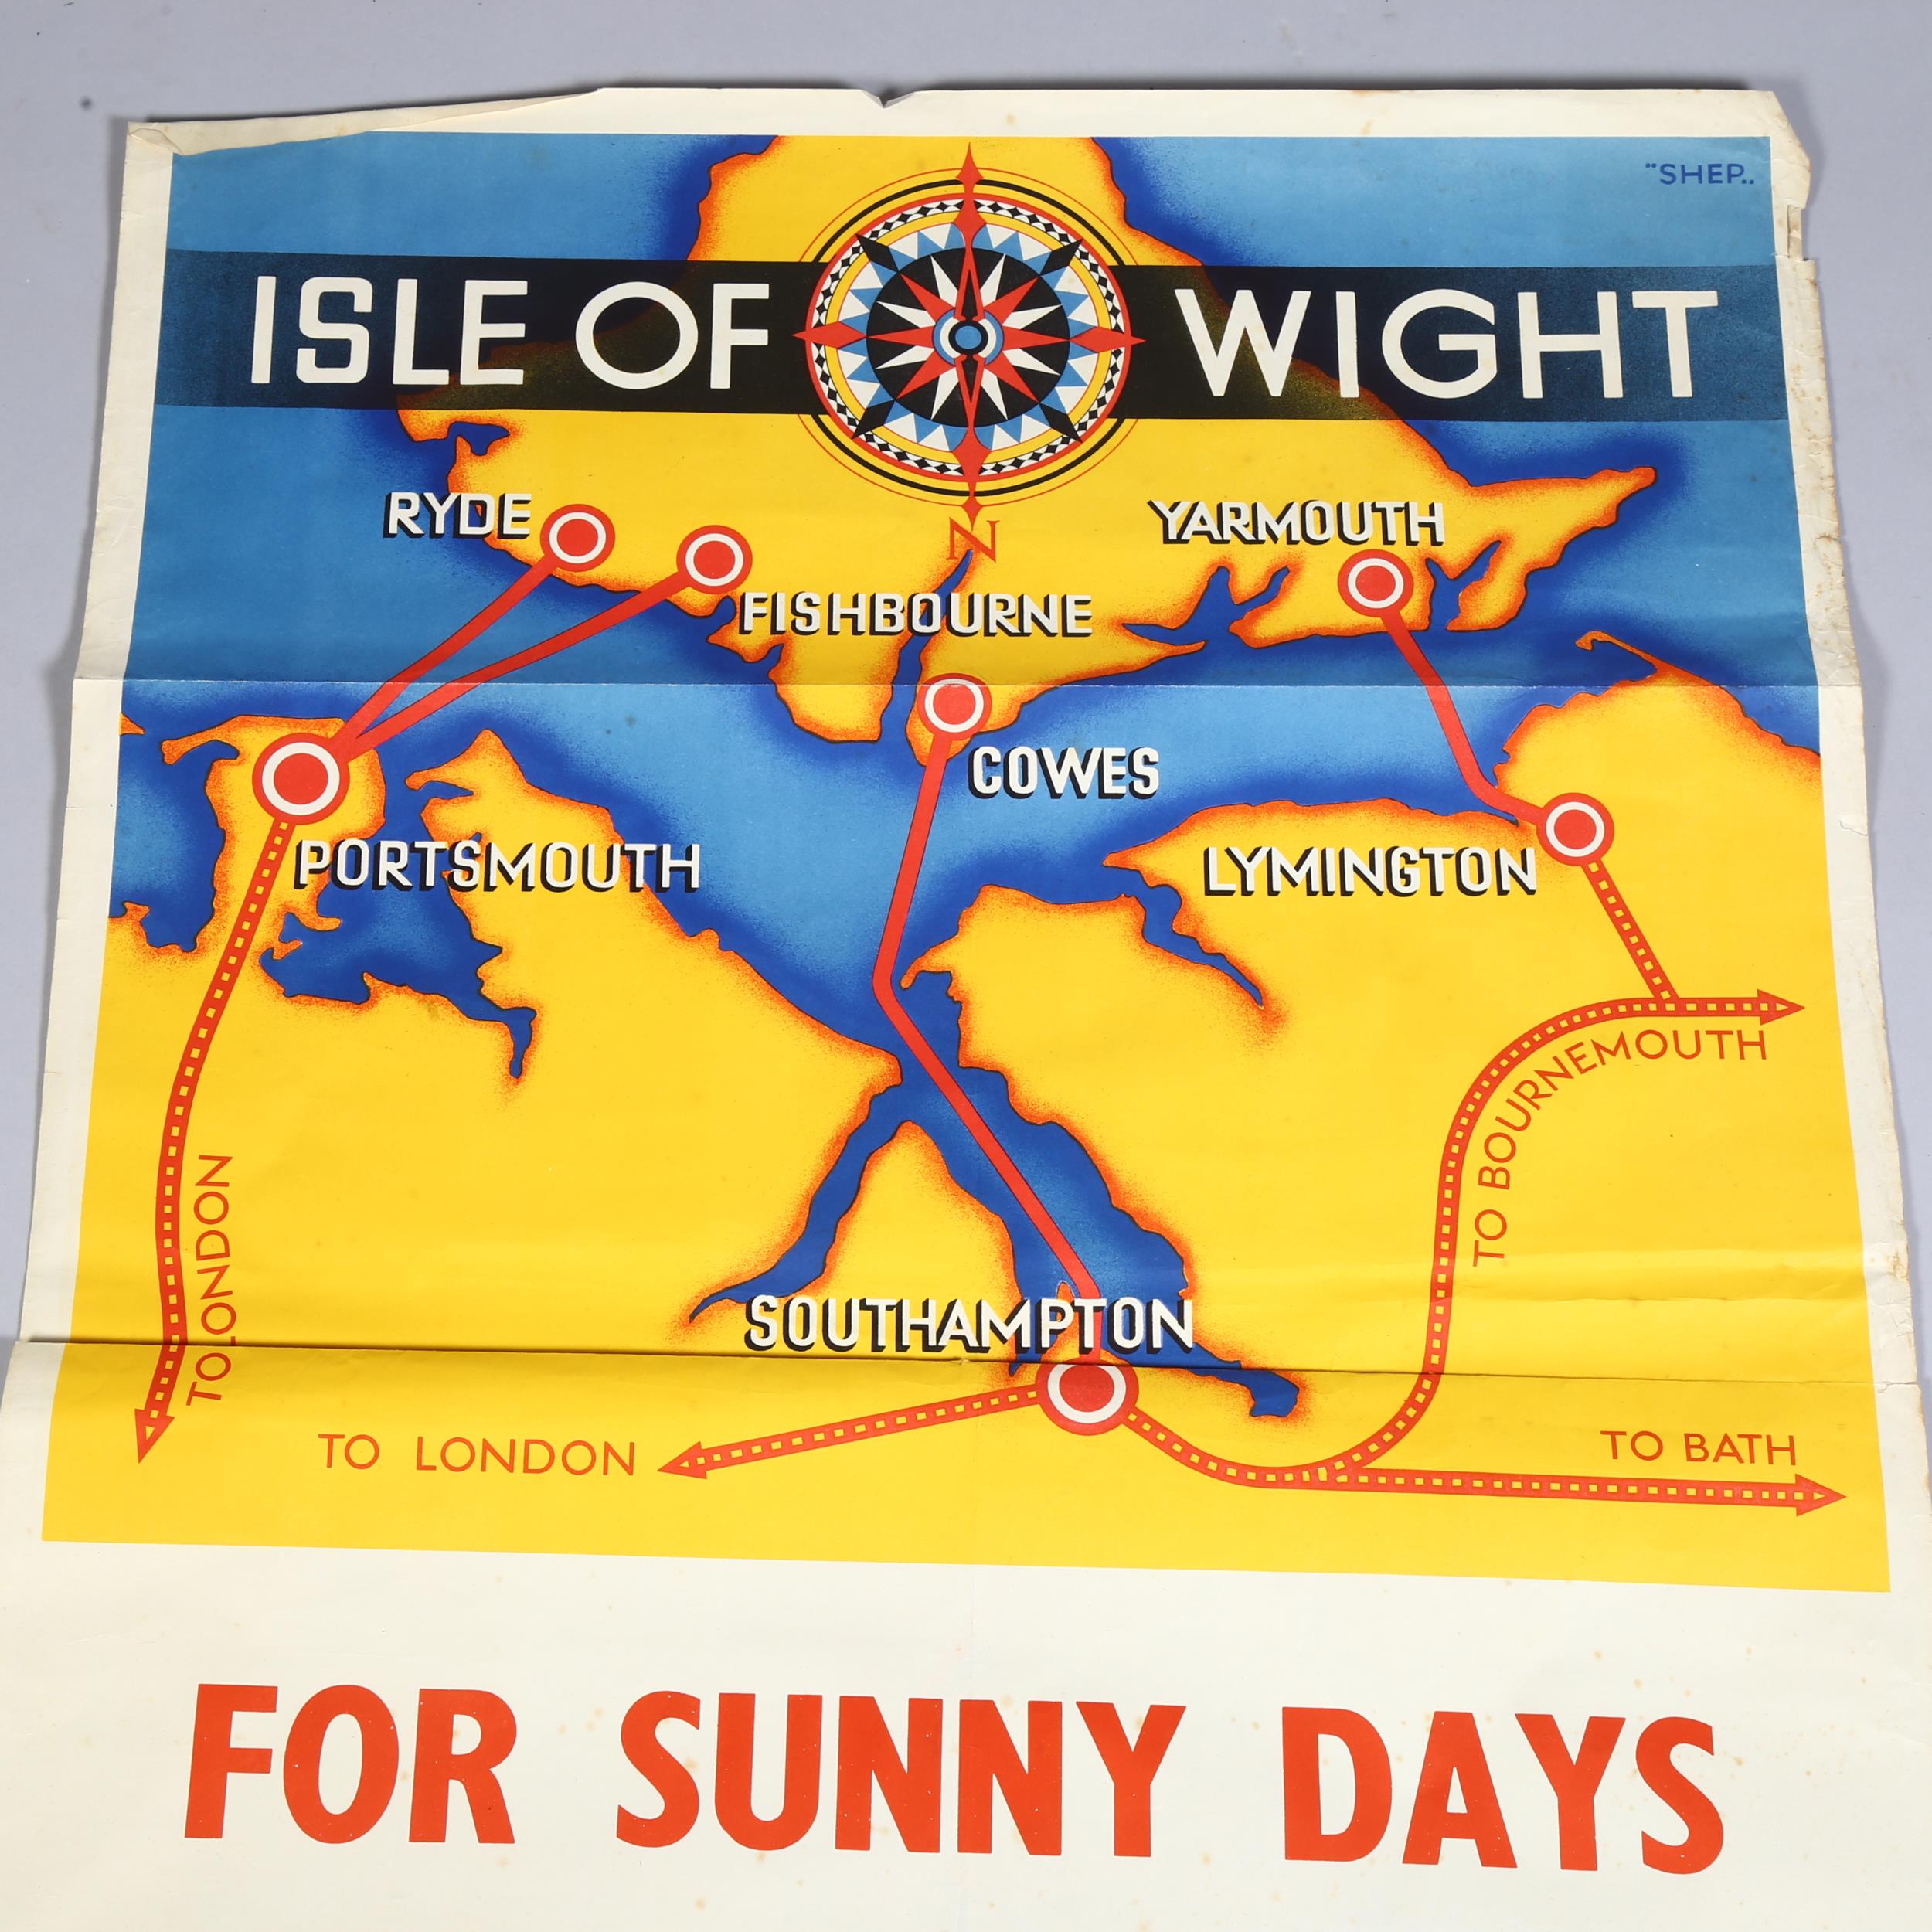 RAILWAY INTEREST - a British Railways advertising poster, circa 1950s, for Isle of Wight, printed at - Image 2 of 3